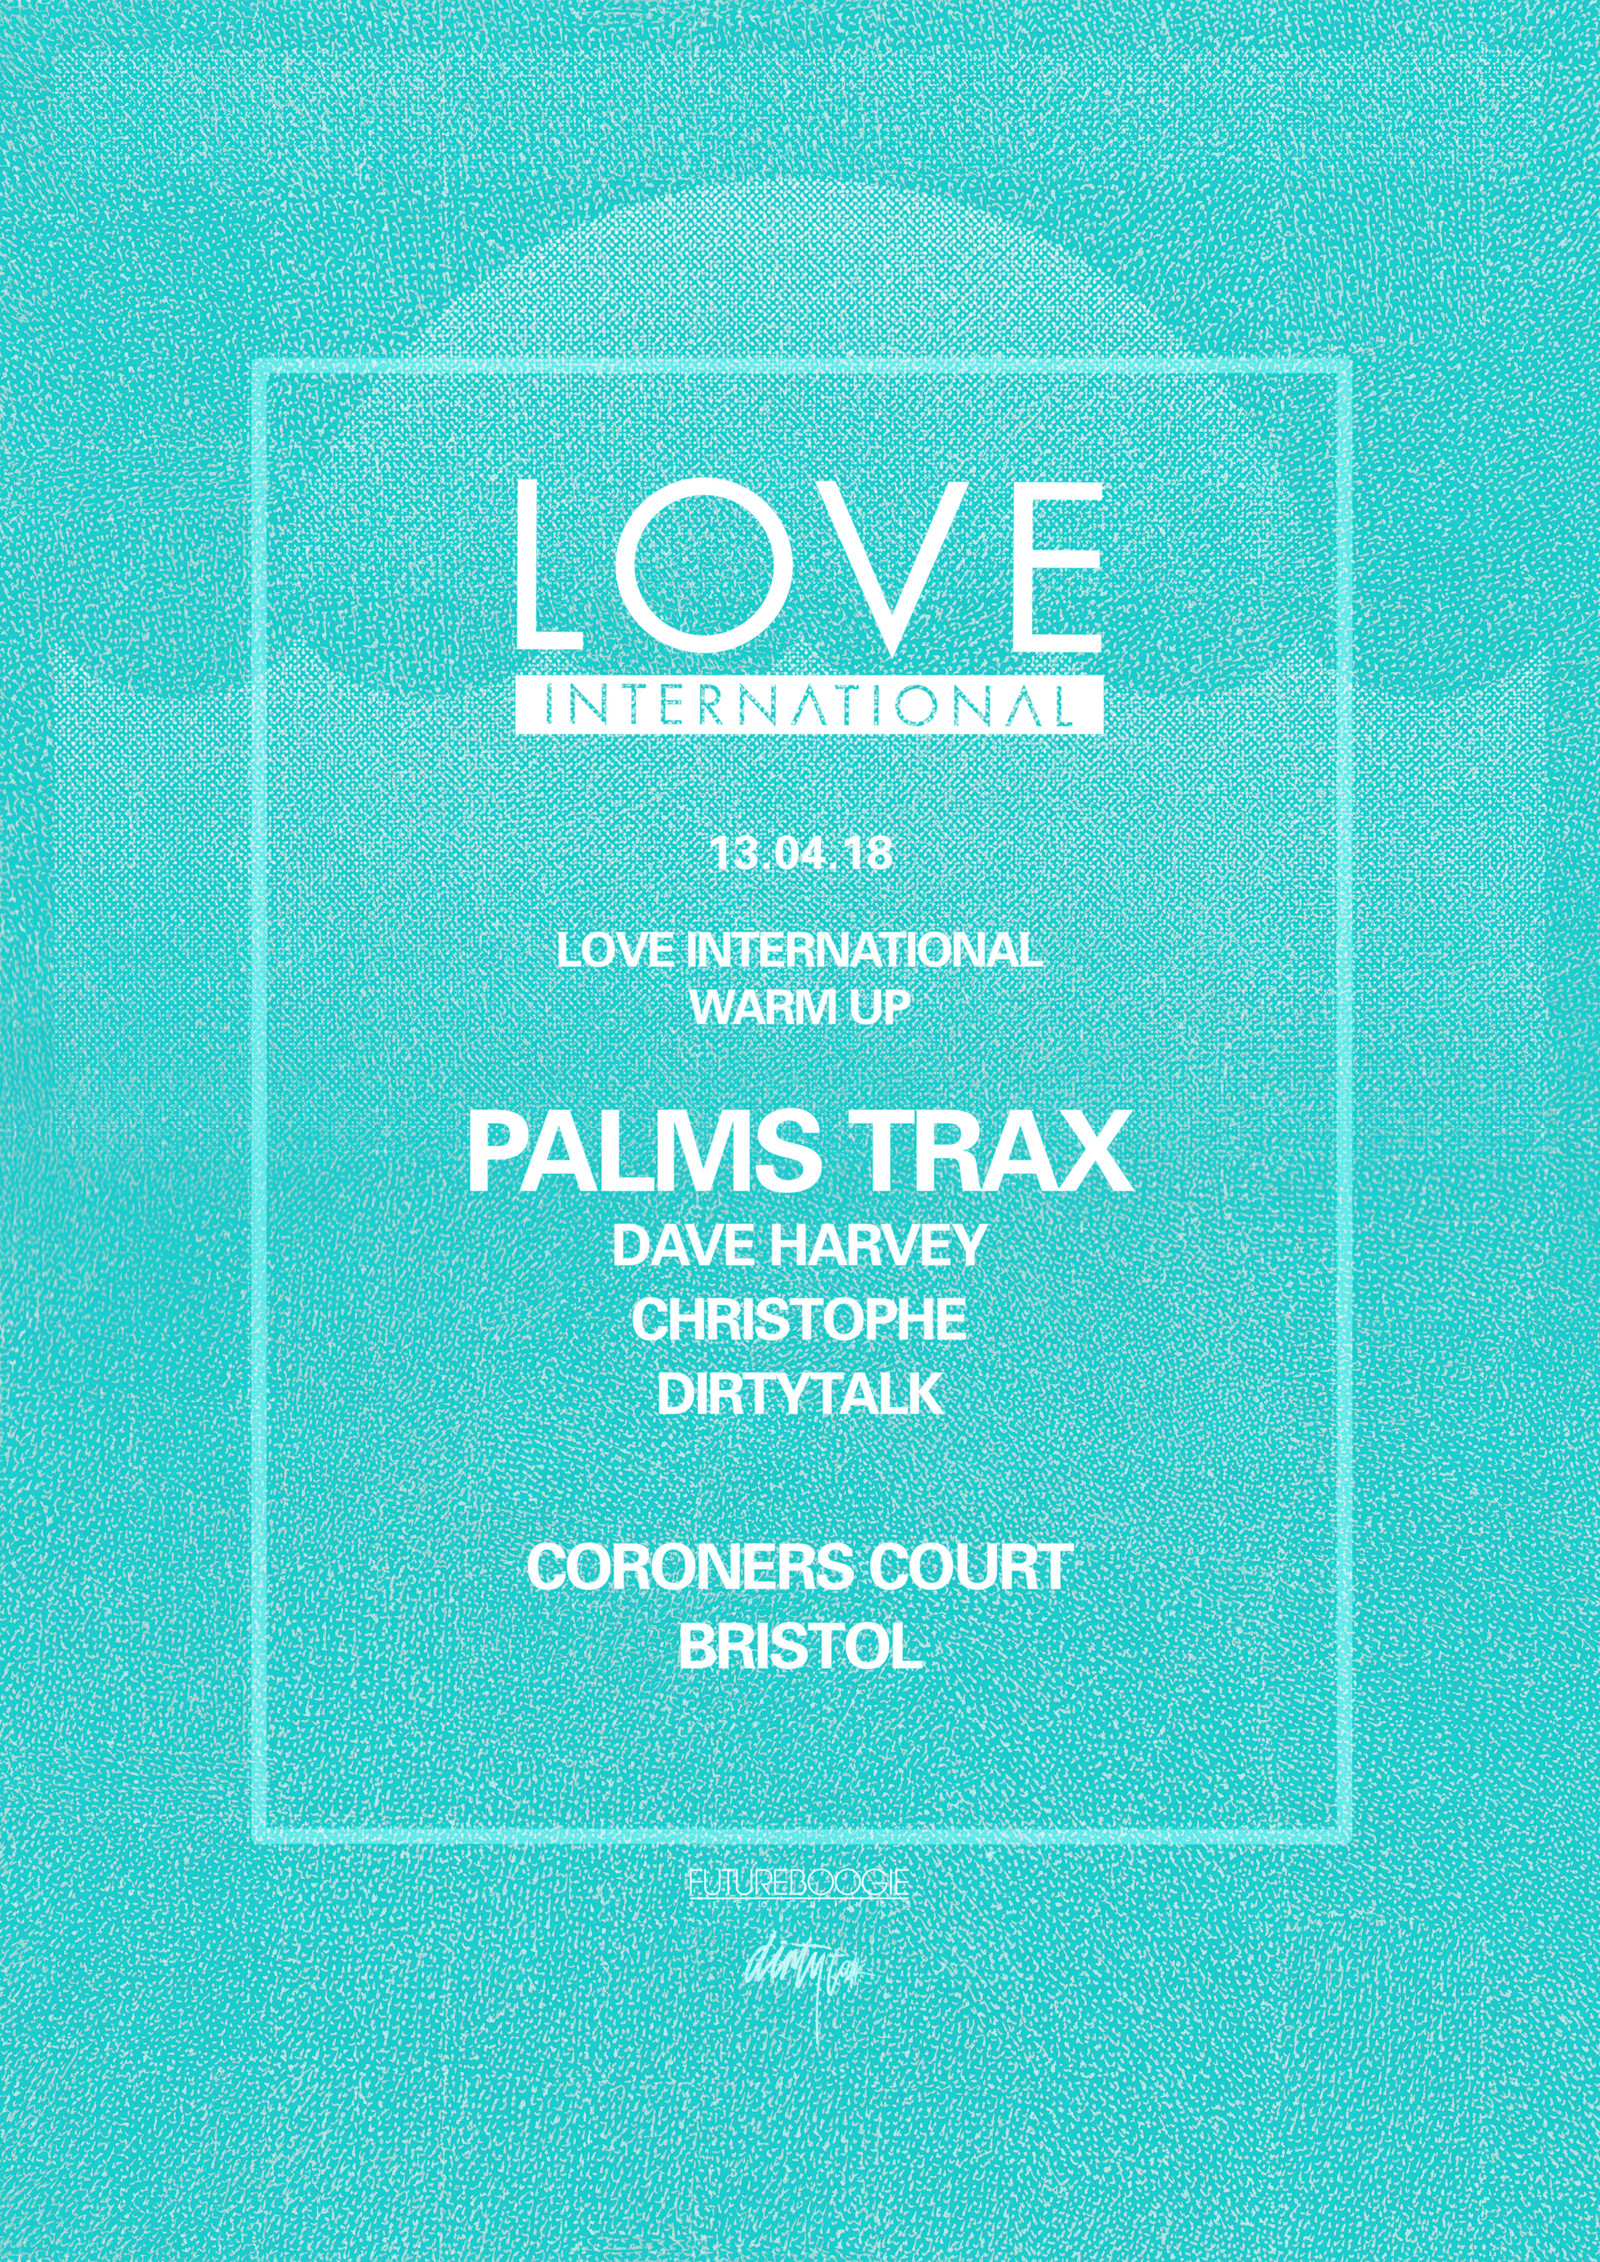 Love International presents: Palms Trax at The Coroner's Court